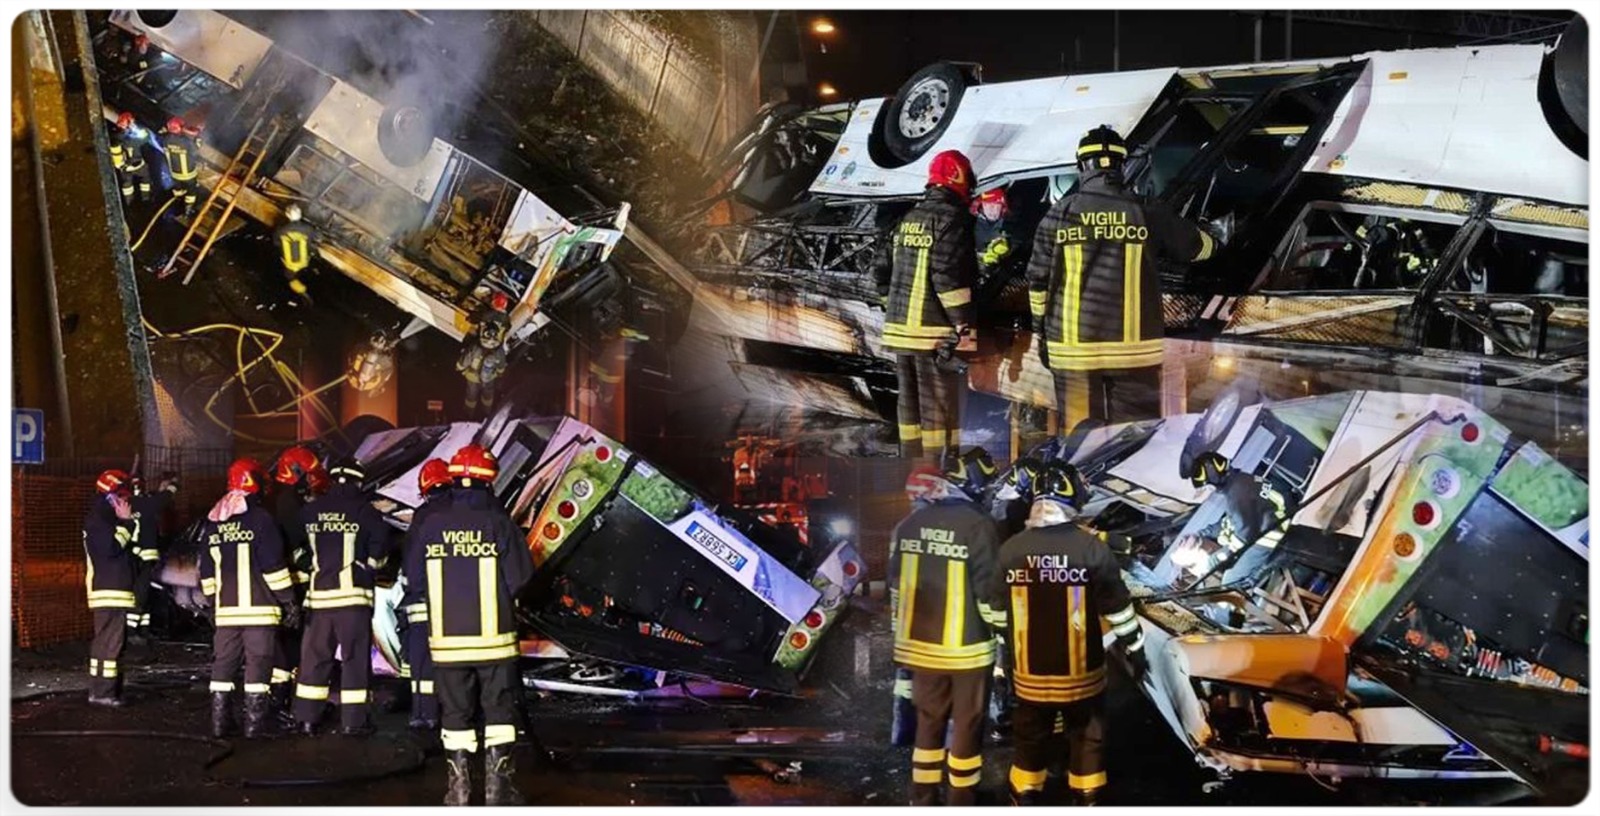 at-least-21-killed-over-18-injured-in-bus-crash-in-venice